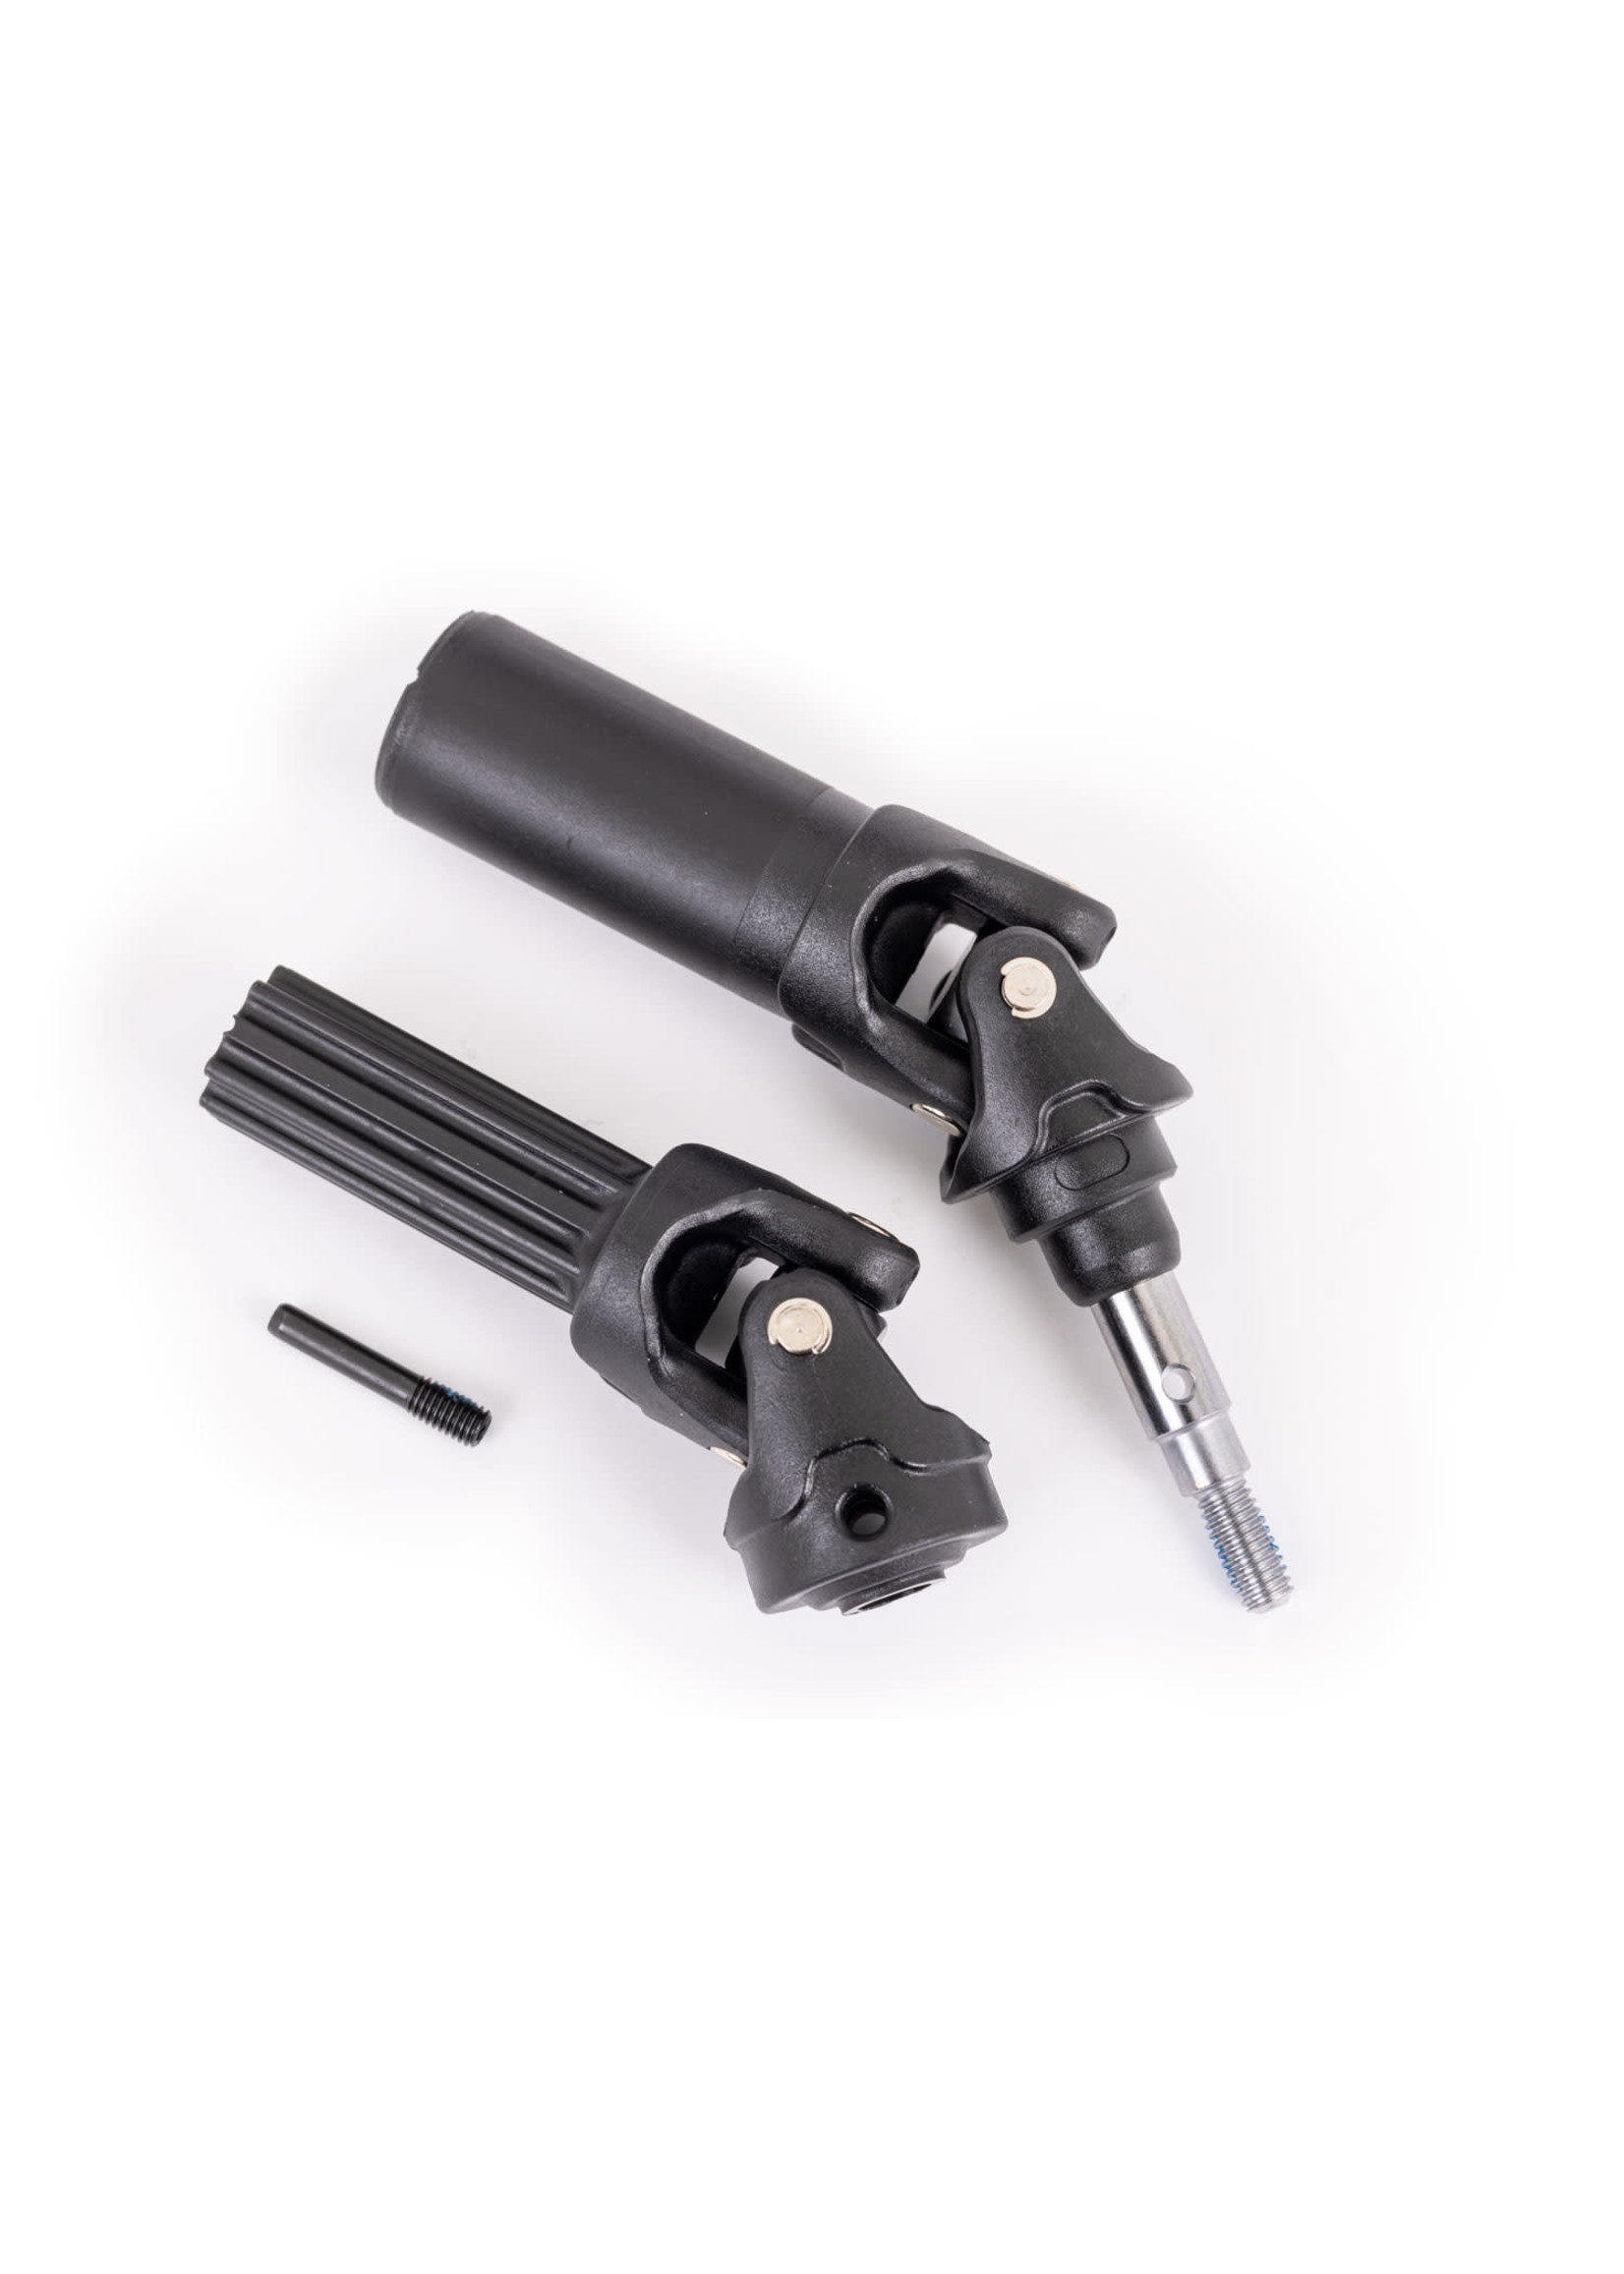 Traxxas TRA9052 Traxxas Driveshaft Assembly, Rear, Extreme Heavy Duty With 6mm Axle (1)/ Screw Pin (1) (Left Or Right) (Fully Assembled, Ready To Install) (For Use With #9080 Upgrade Kit)